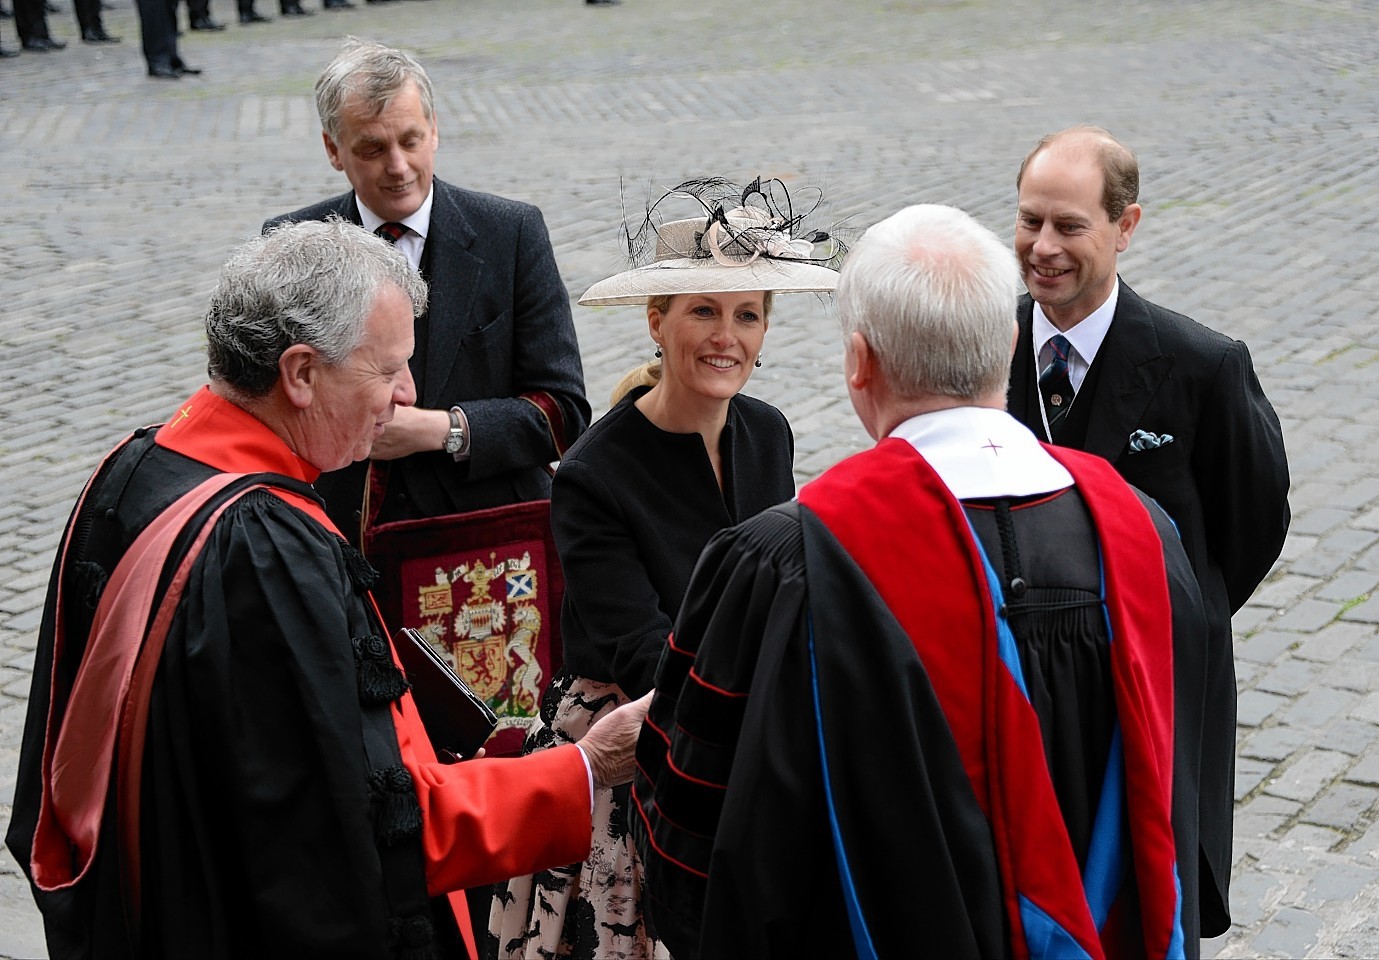 The Earl and Countess of Wessex have already visited Edinburgh earlier this week